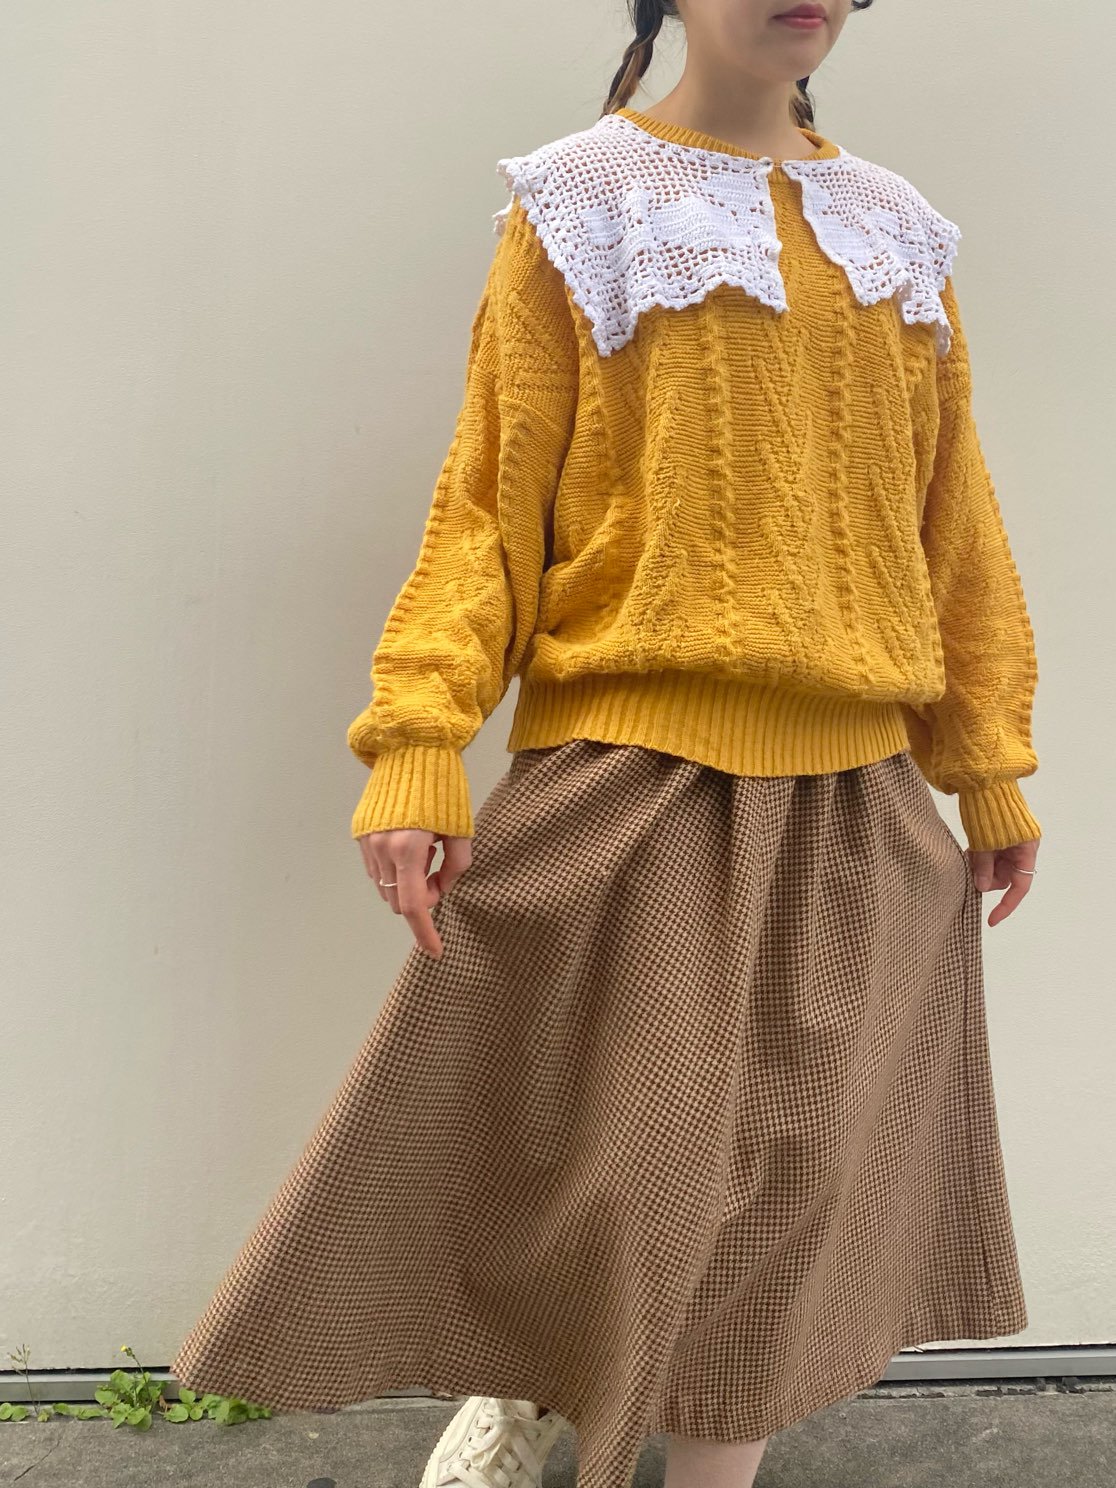 <img class='new_mark_img1' src='https://img.shop-pro.jp/img/new/icons20.gif' style='border:none;display:inline;margin:0px;padding:0px;width:auto;' />《50%OFF SALE》mustard color sweater